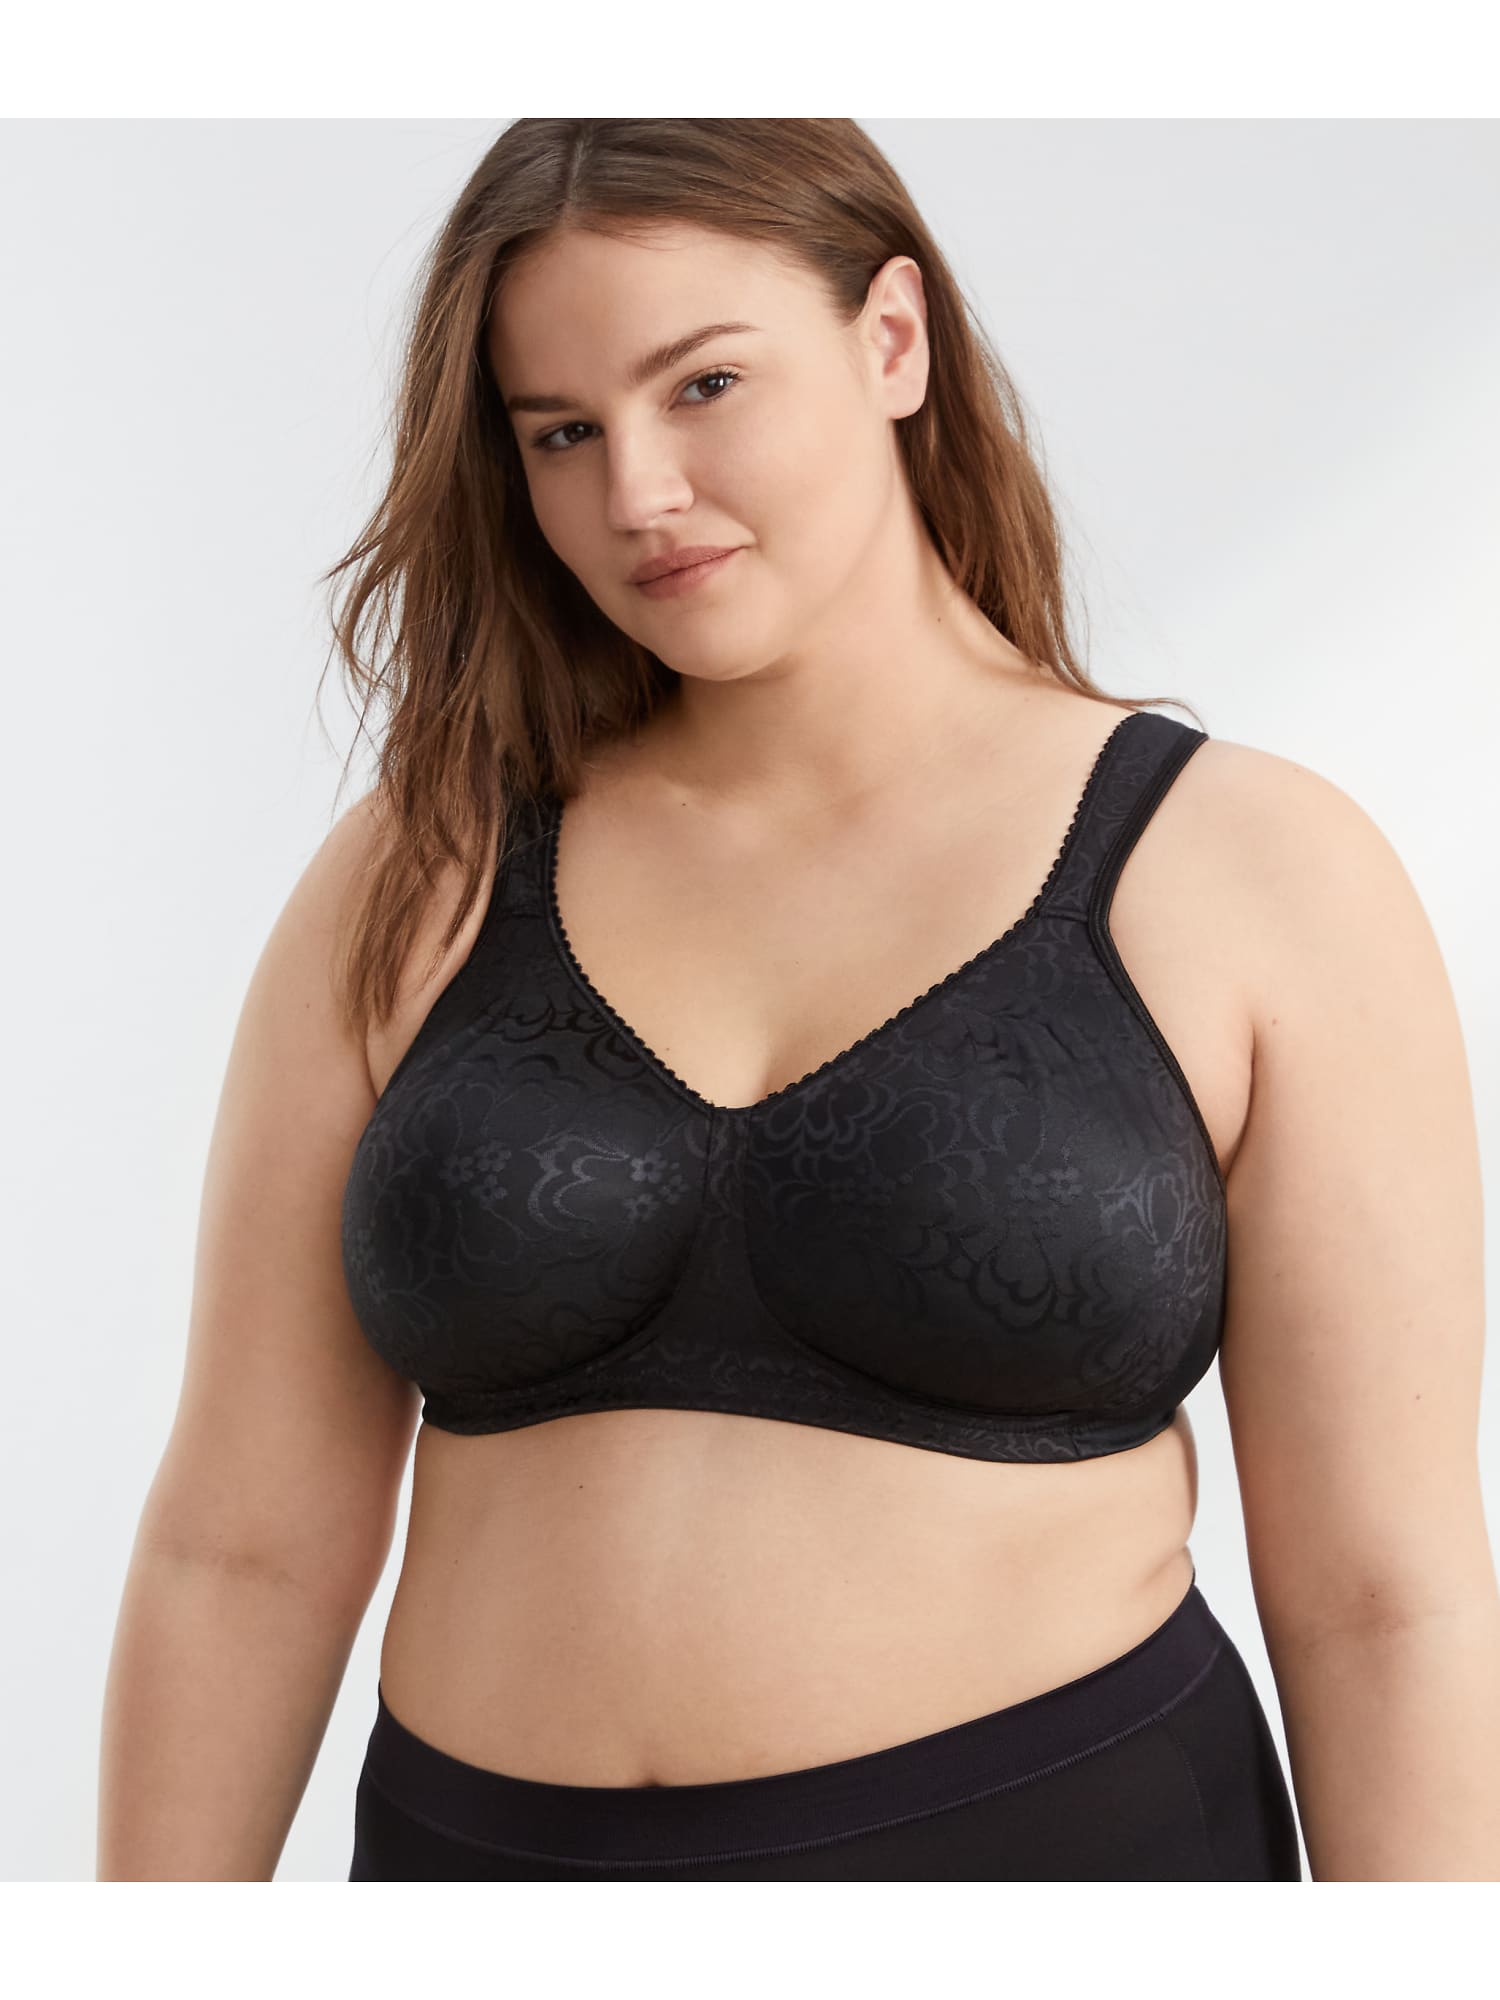 Playtex Women's 18 Hour Ultimate Lift and Support Wire Black Size